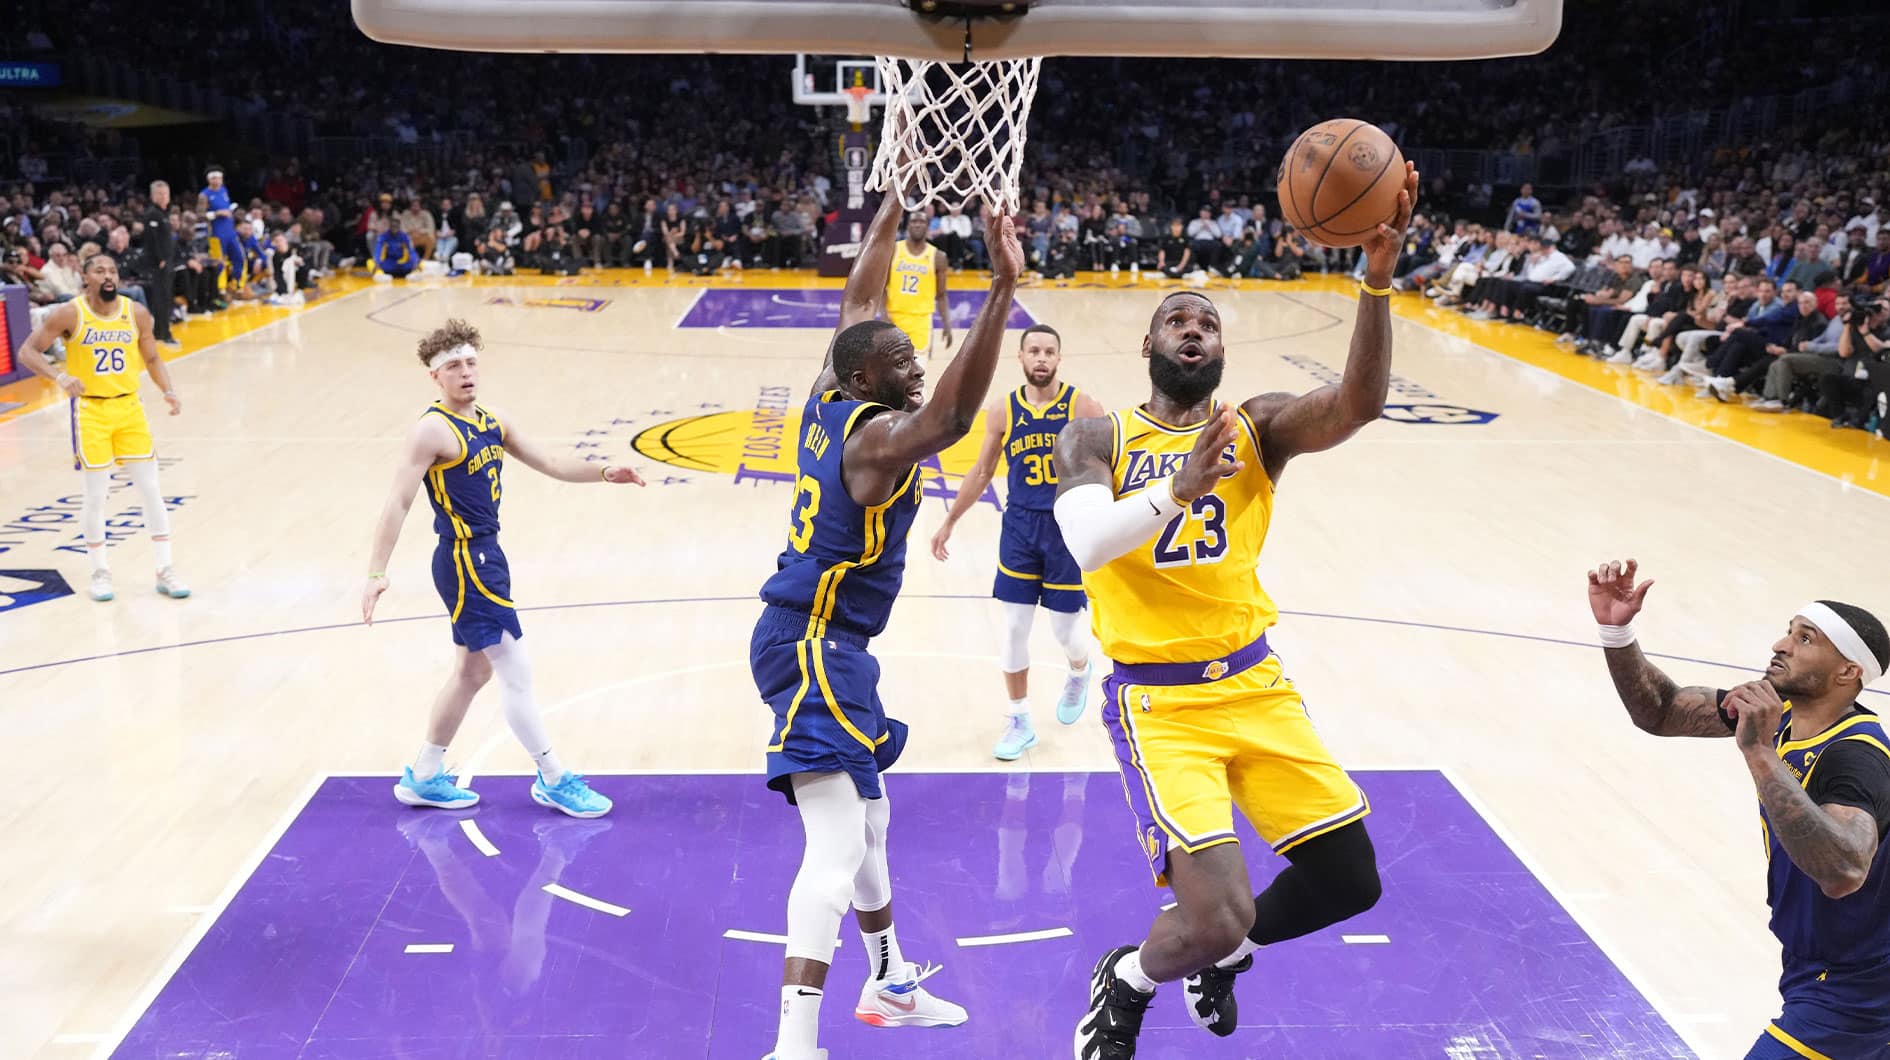 Los Angeles Lakers forward LeBron James (23) shoots the ball against Golden State Warriors forward Draymond Green (23) in the second half at Crypto.com Arena.